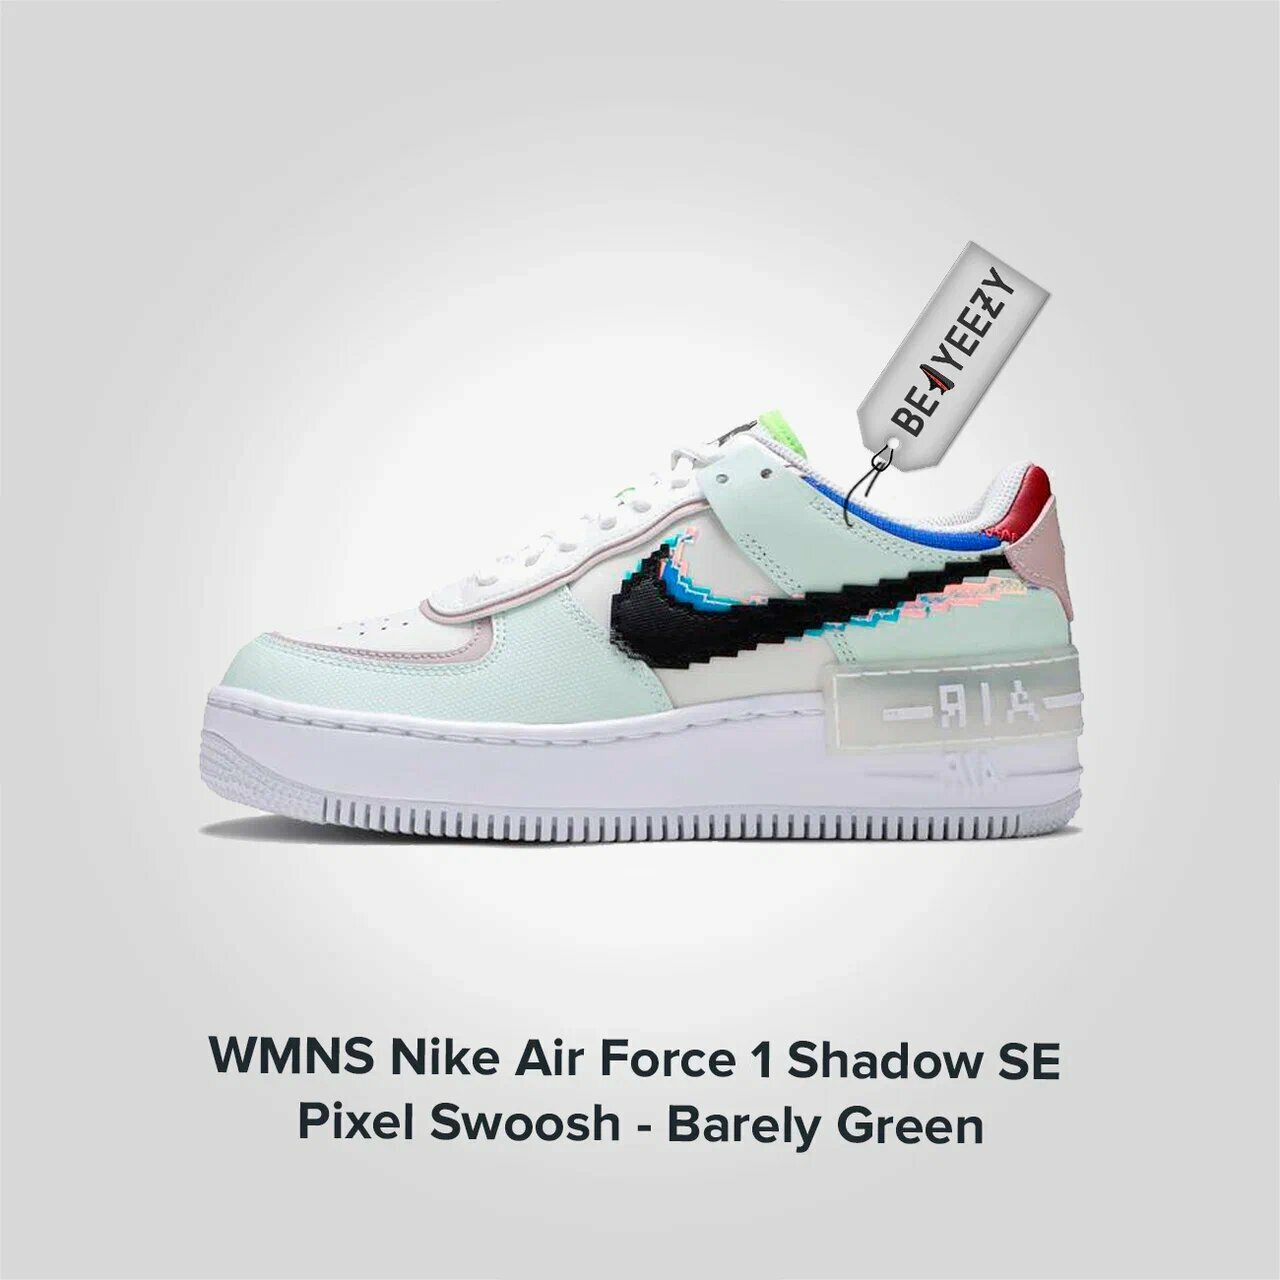 Nike Air Force 1 Shadow SE Pixel Swoosh Barely Green